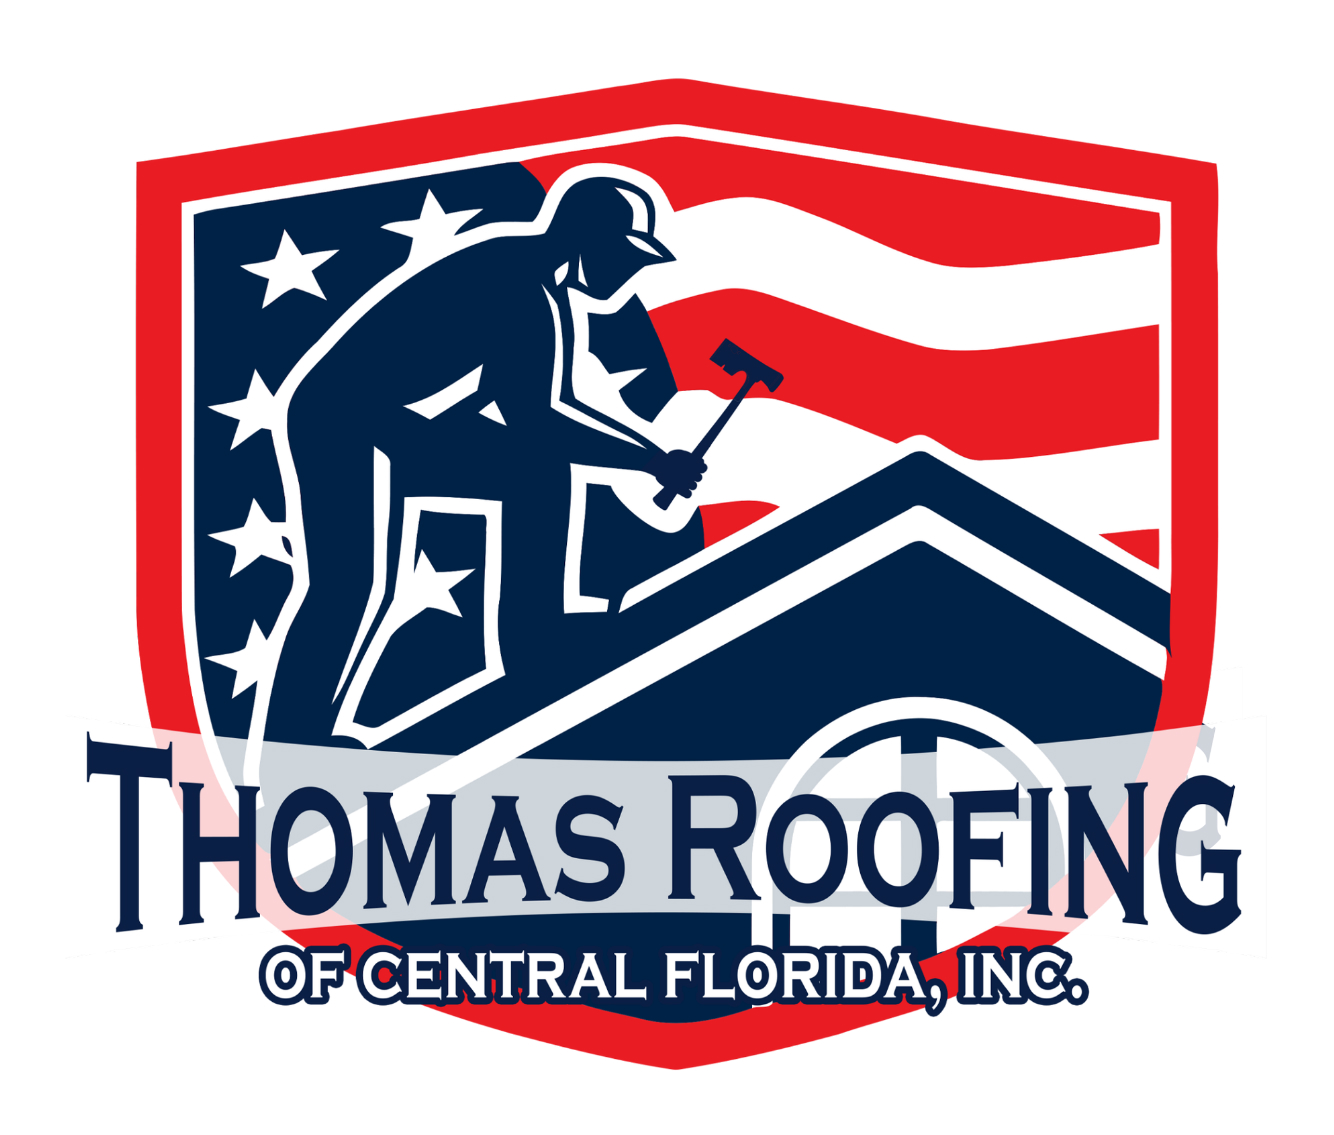 Thomas Roofing